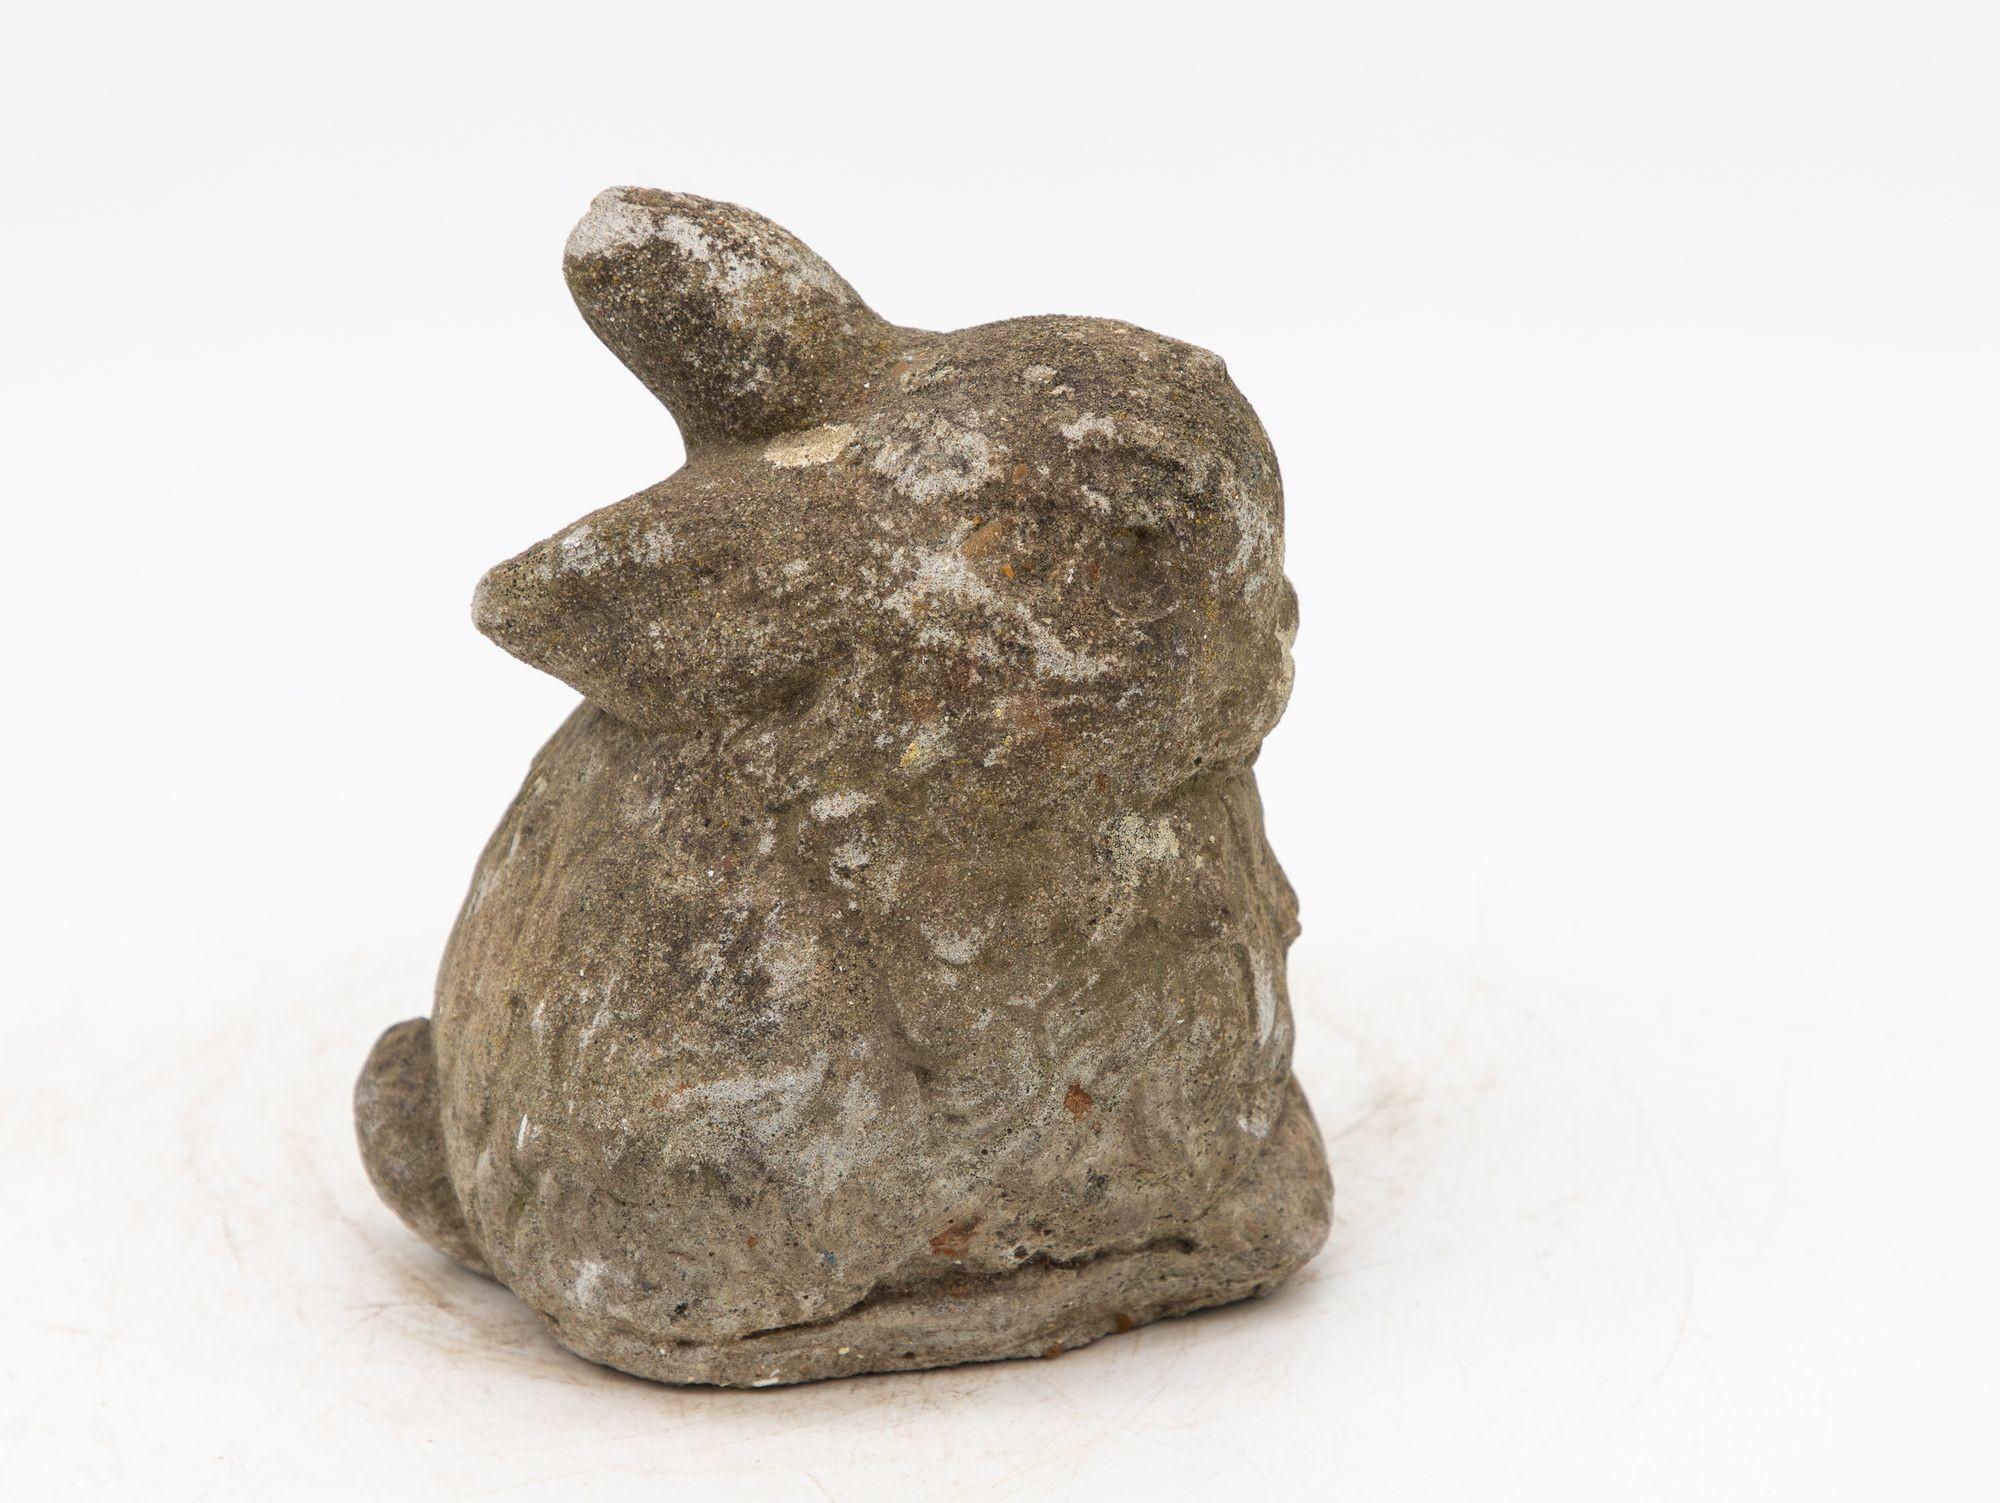 Concrete Garden Ornament Bunny or Rabbit Reconstituted Stone, England Mid 20th C.